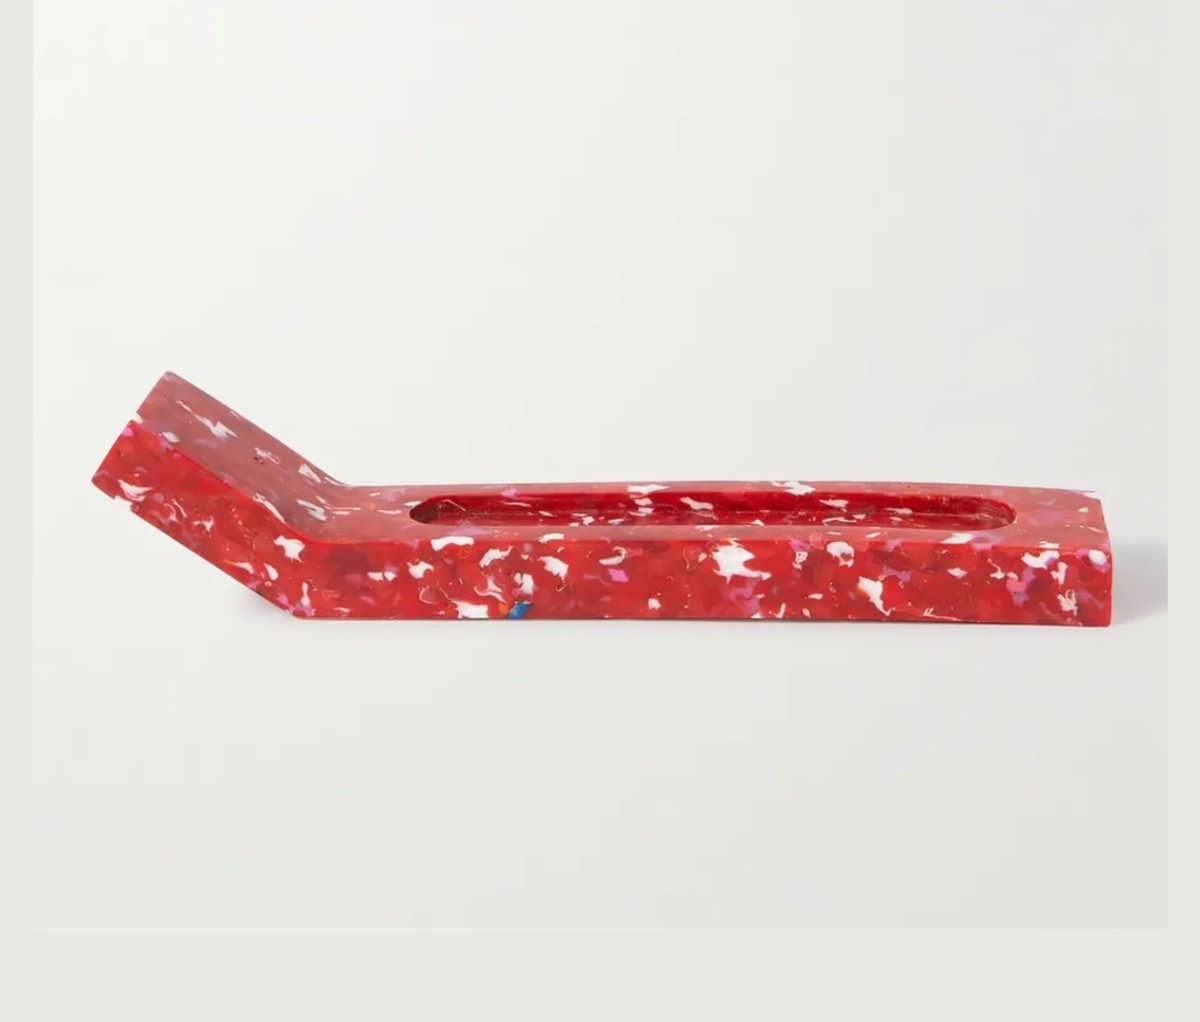 Marble-Effect Recycled Plastic Incense Holder by Space Available